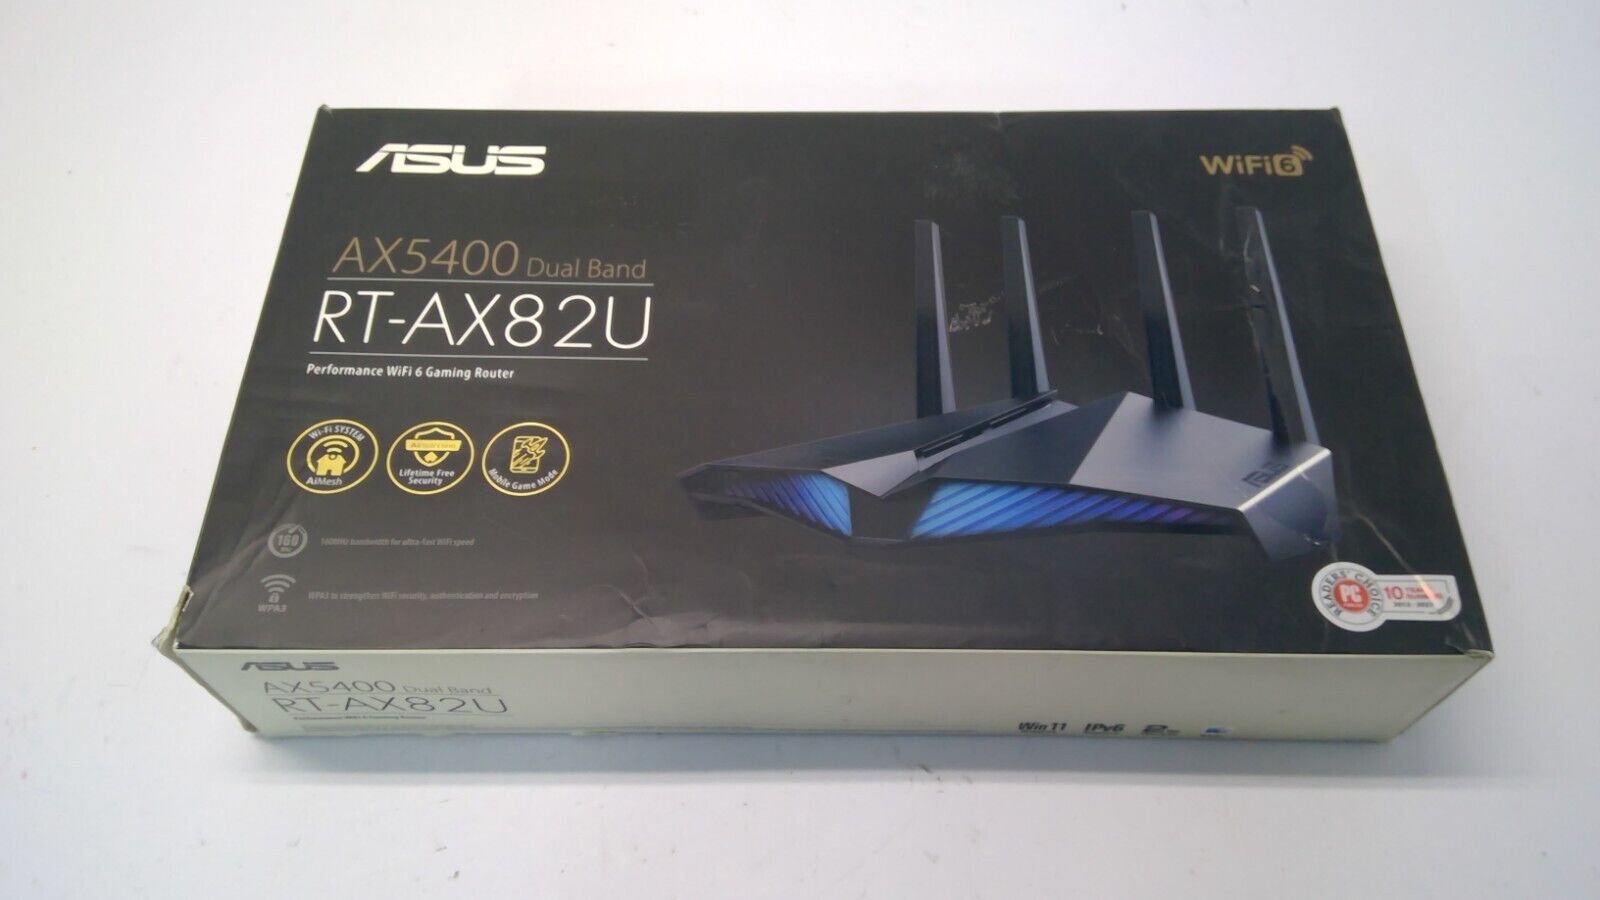 ASUS RT-AX82U (AX5400) Dual Band WiFi 6 Extendable Gaming Router Used